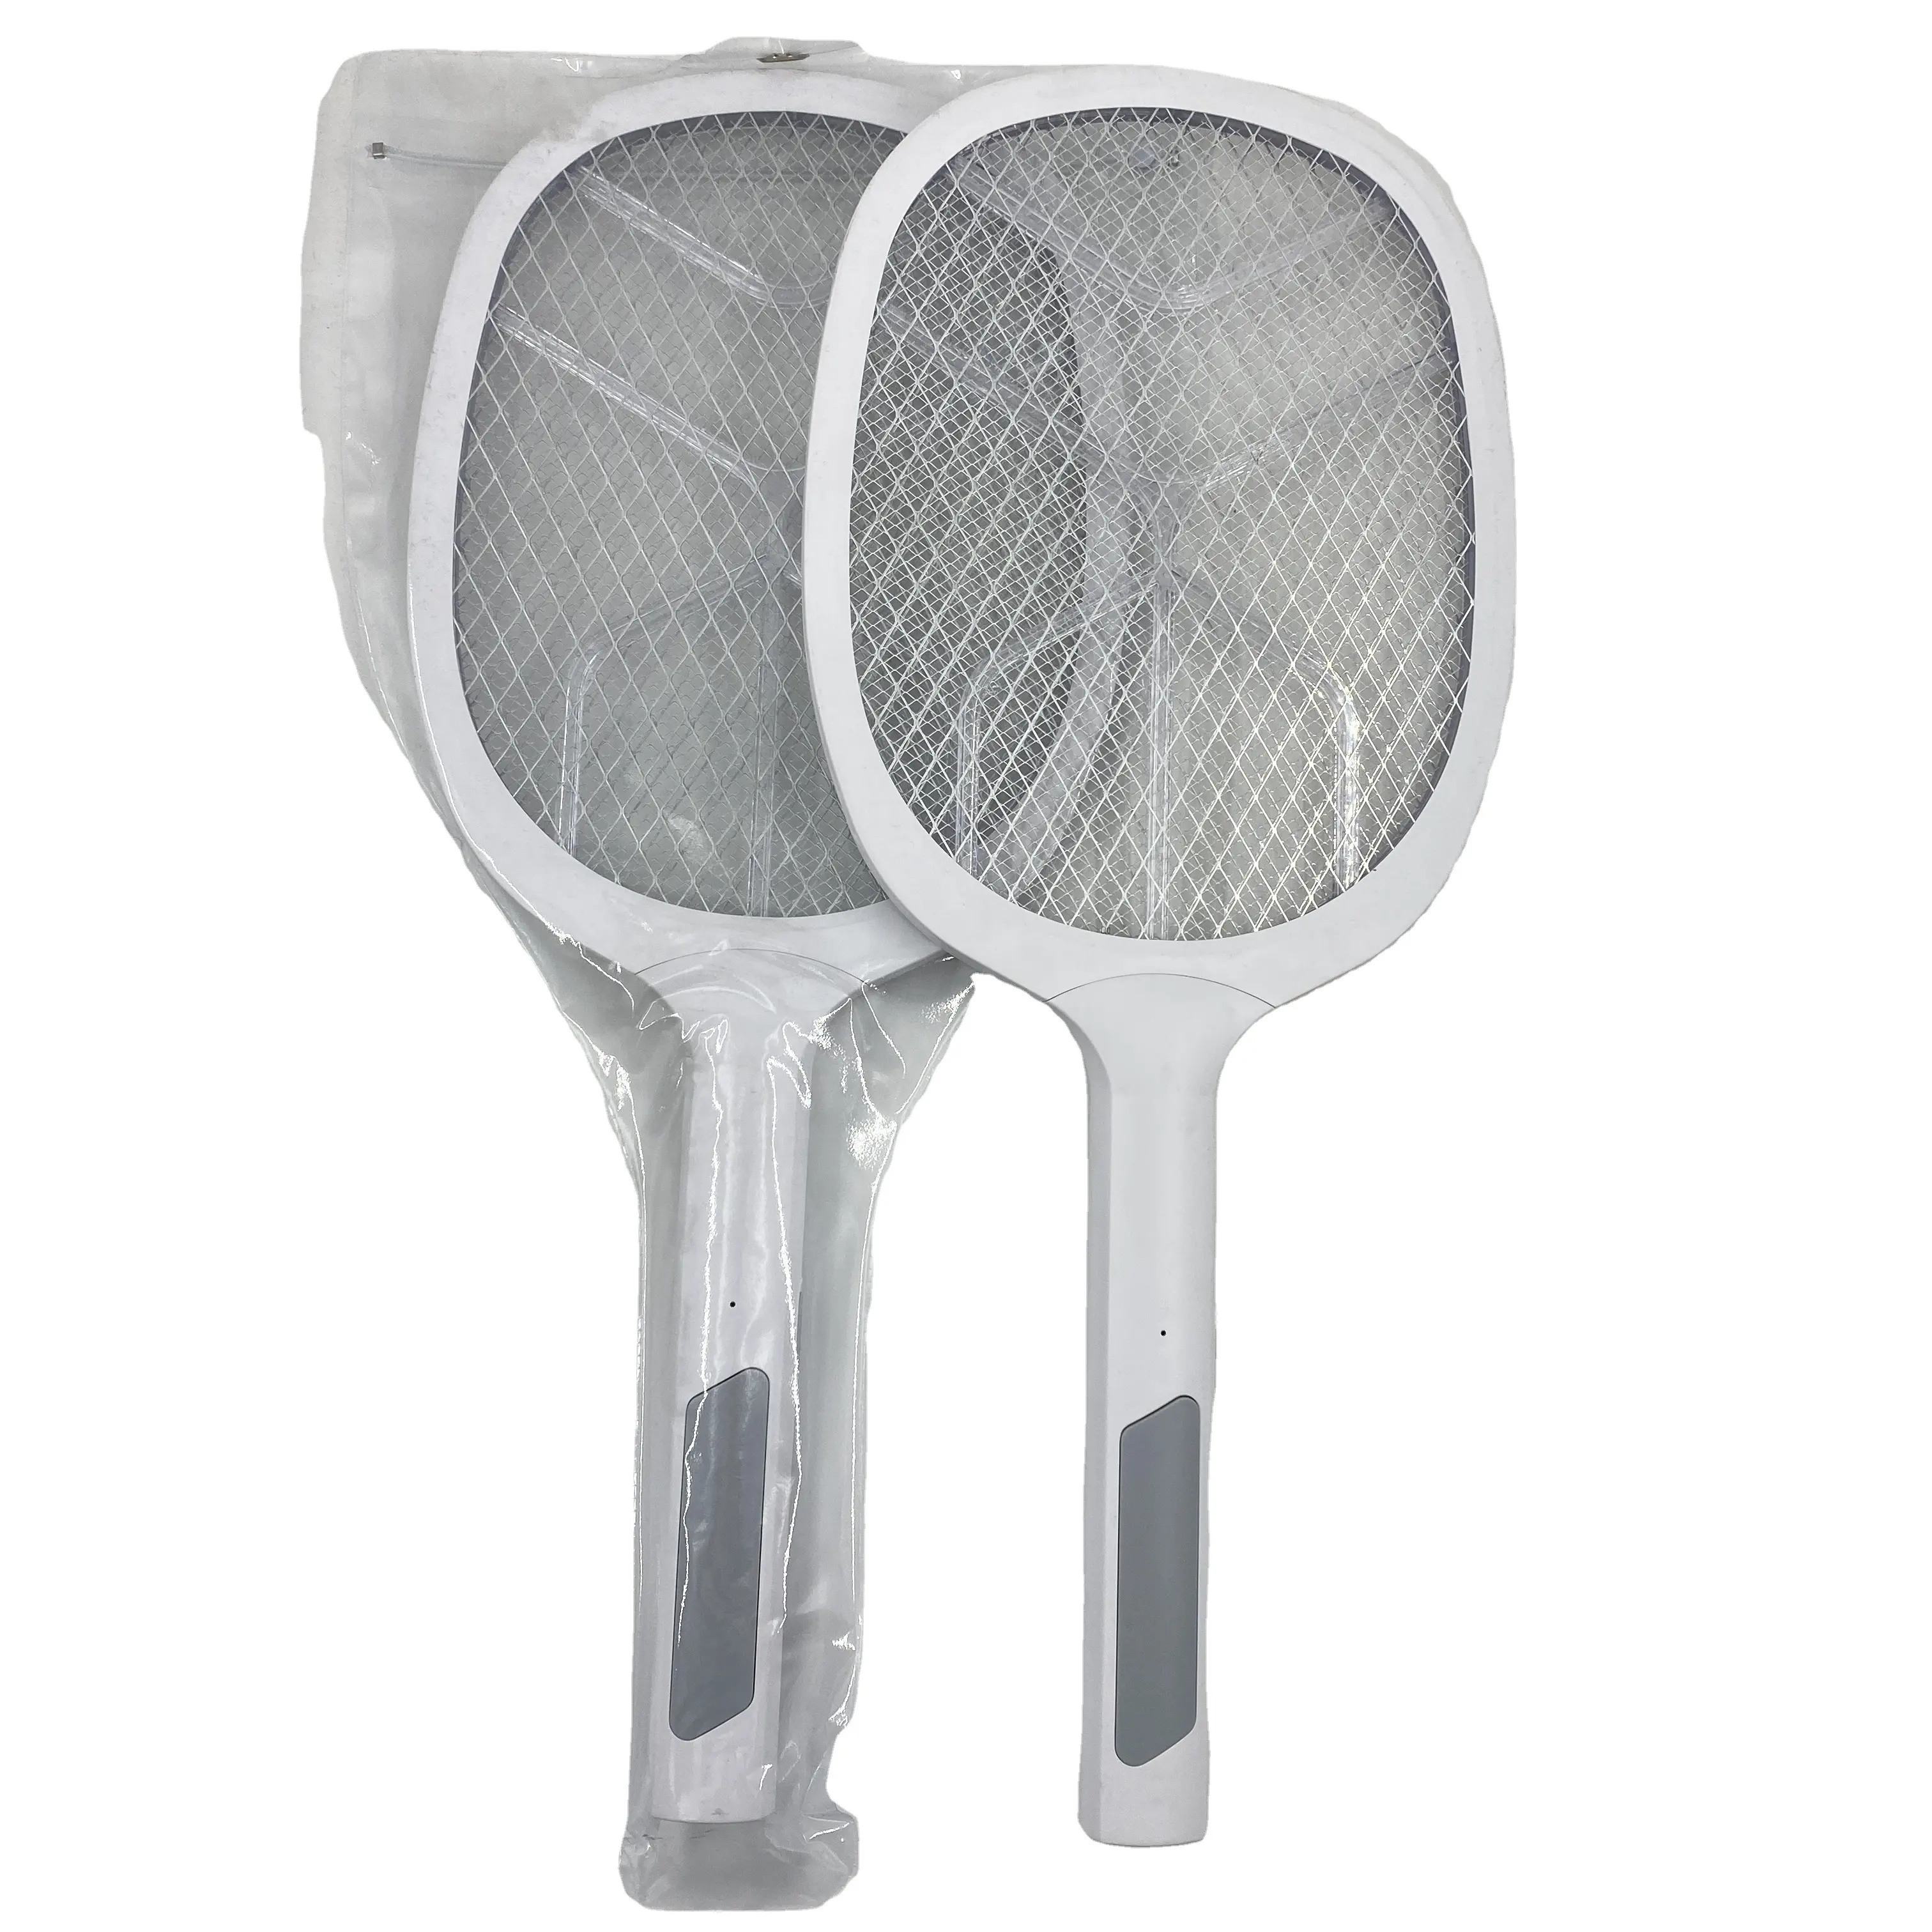 New product bug zapper mosquito killer lamp china electric led bat 2 in 1 electric mosquito swatter usb rechargeable